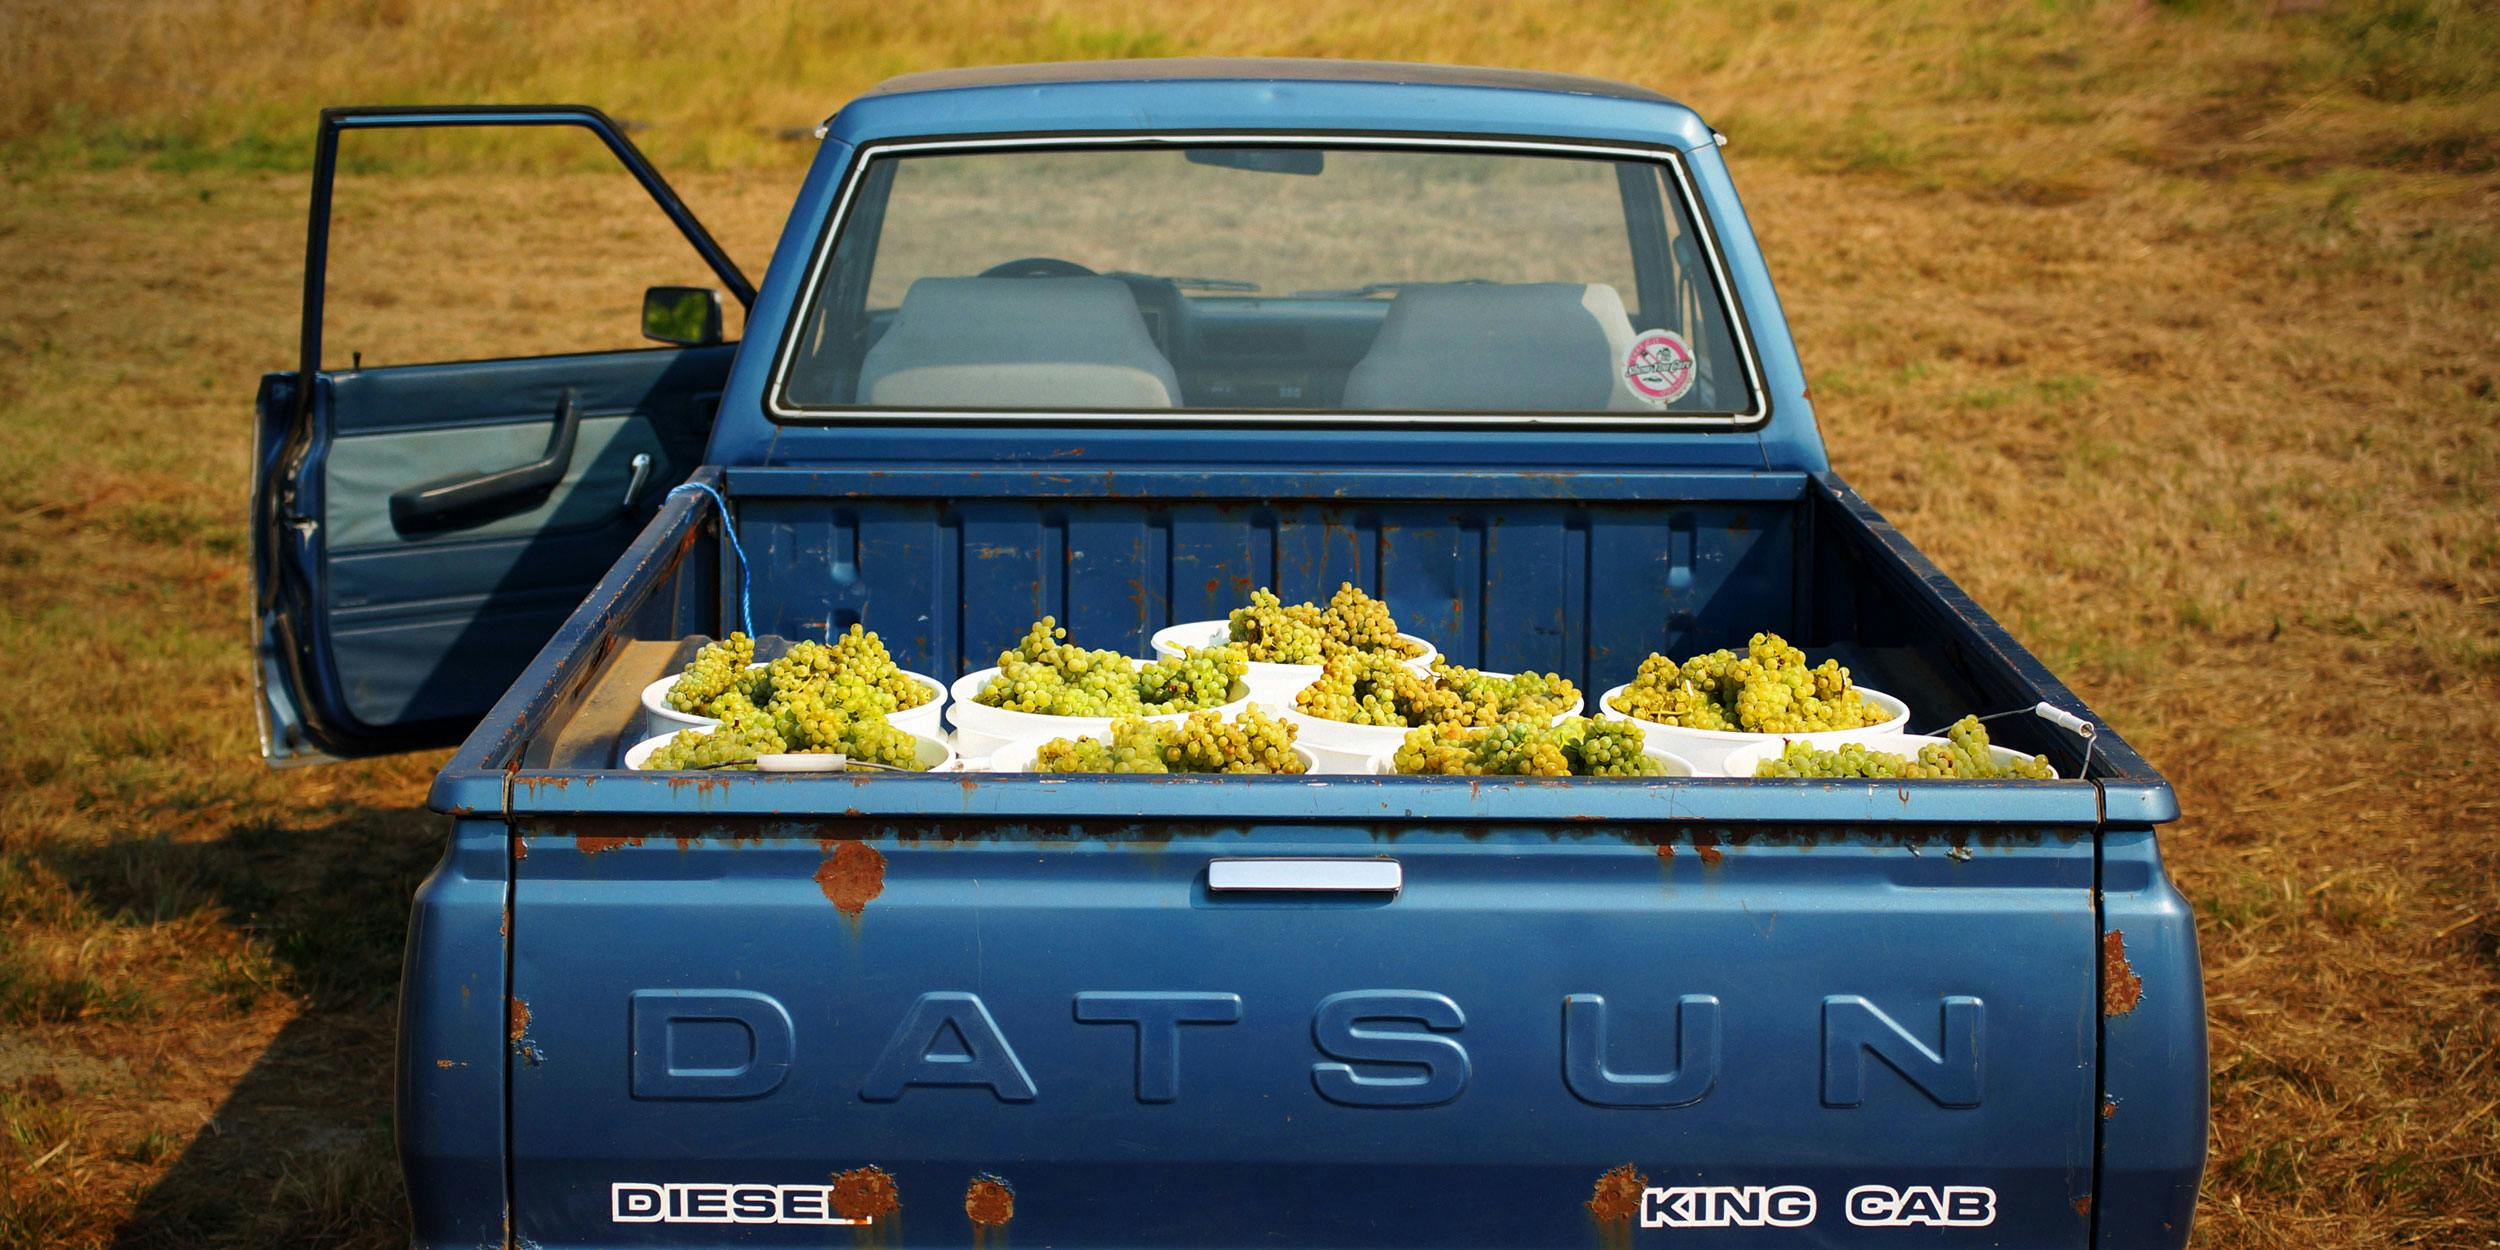 Truck full of grapes to make wine